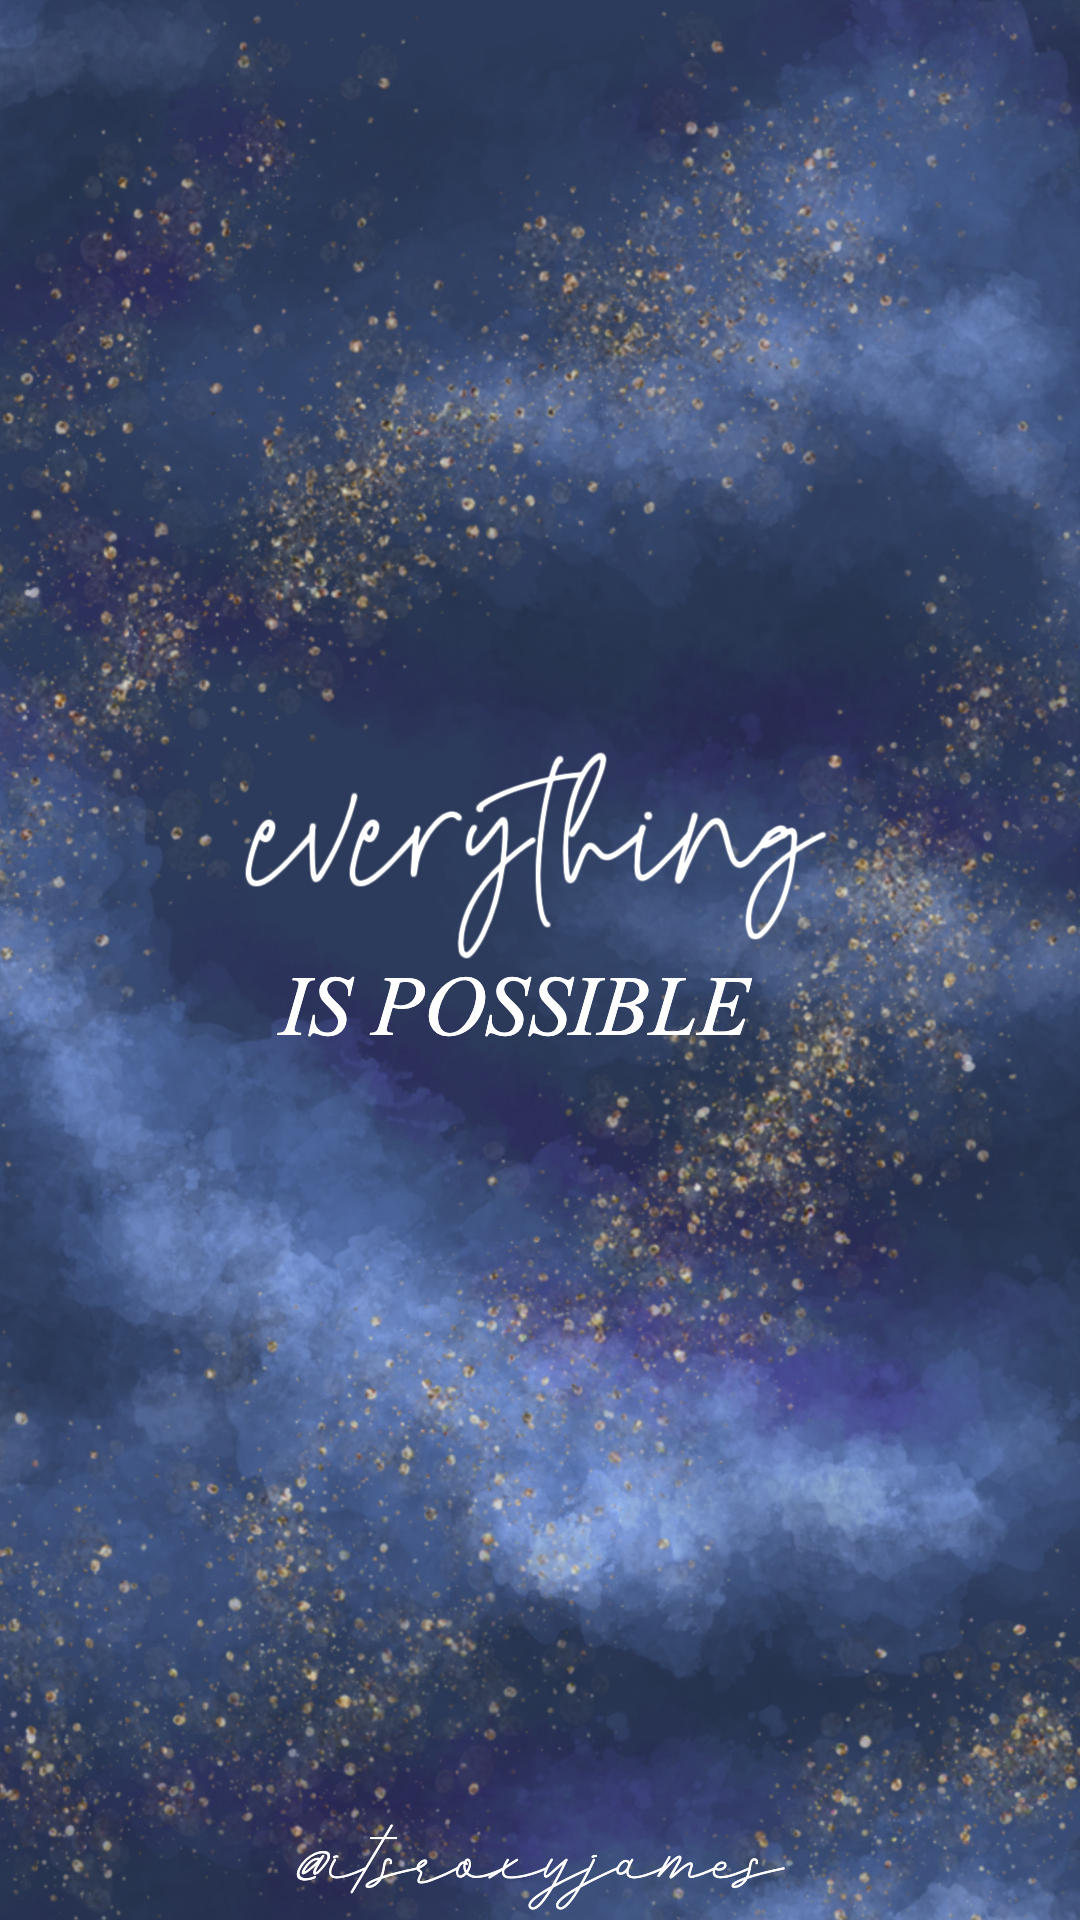 Free Phone Wallpapers Manifesting Inspiring By Roxy James